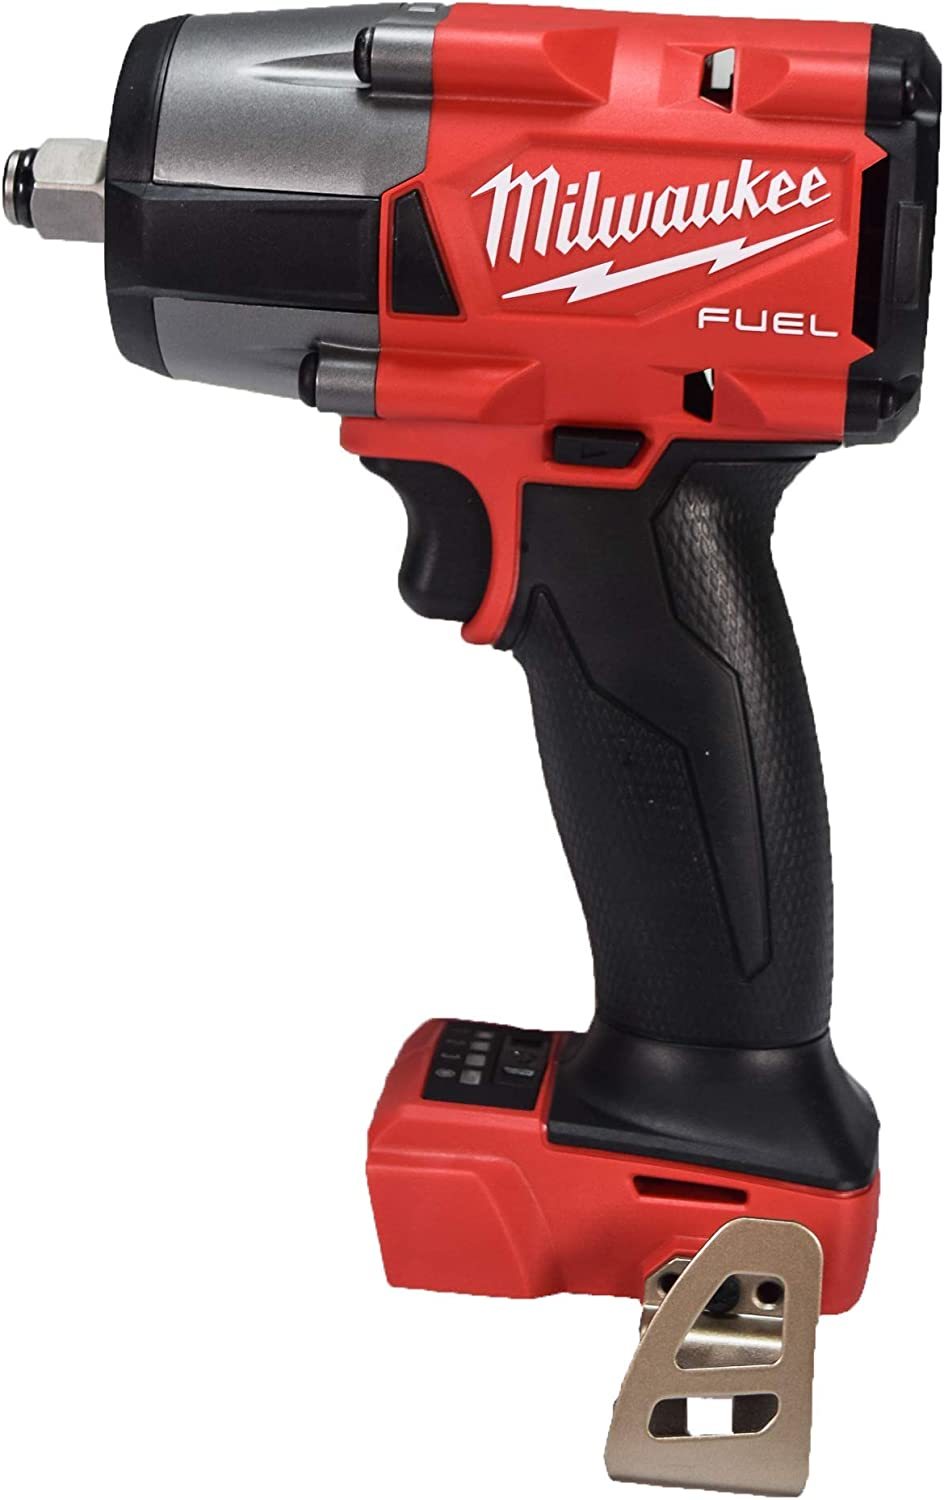 Milwaukee 2962-20 M18 18V Fuel 1/2" Mid-torque Impact Wrench with Friction Ring - $222.99